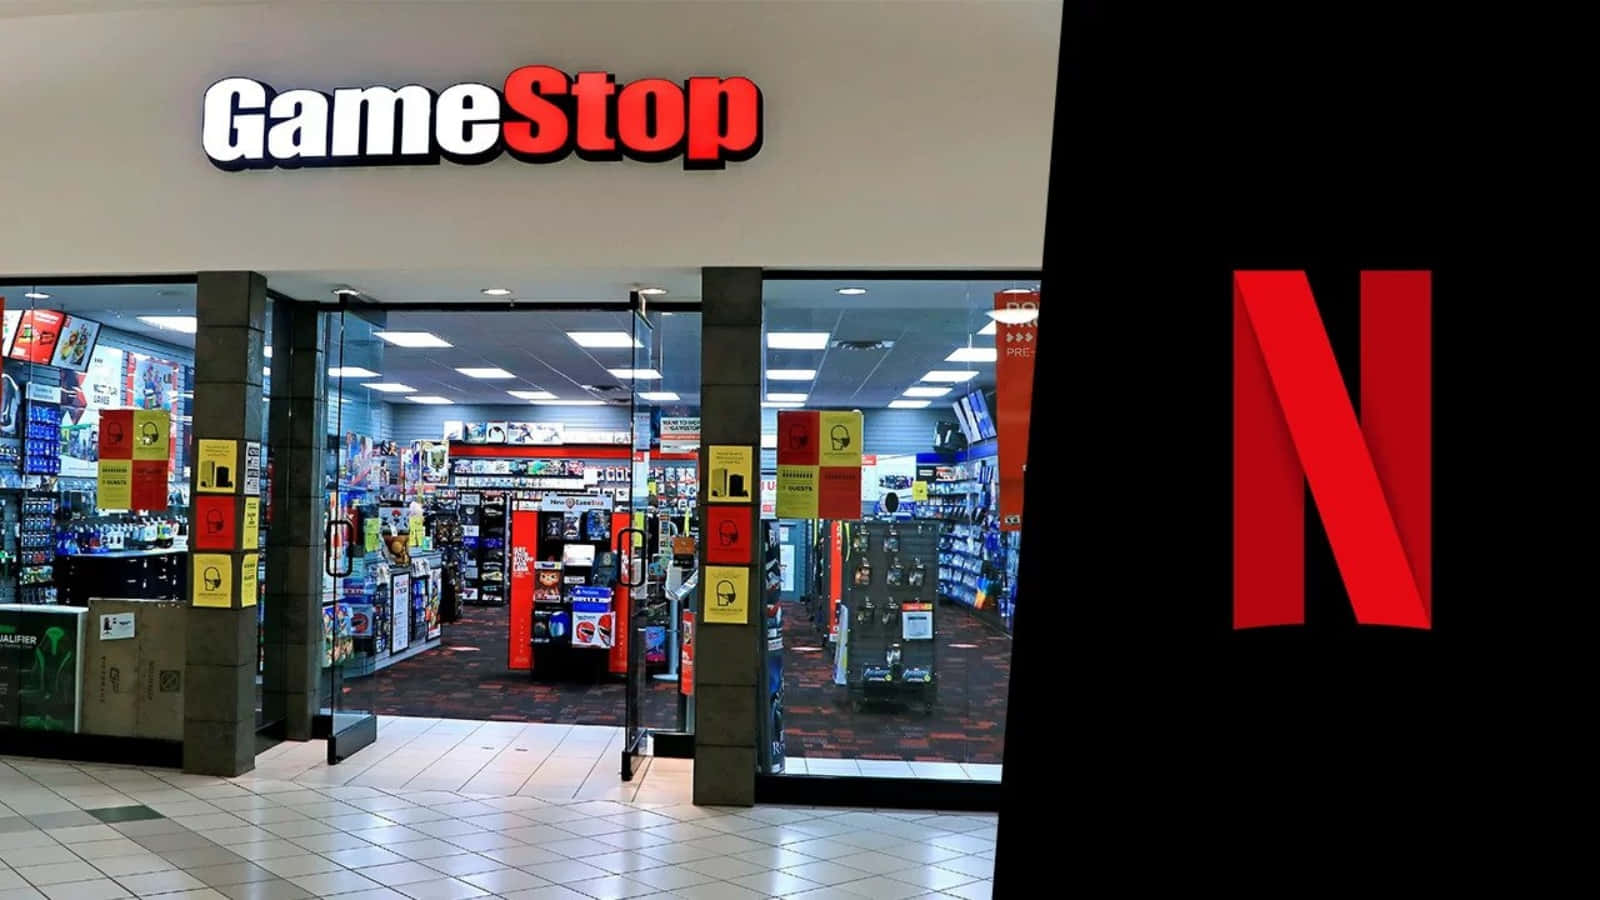 Level up your gaming experience with Gamestop!